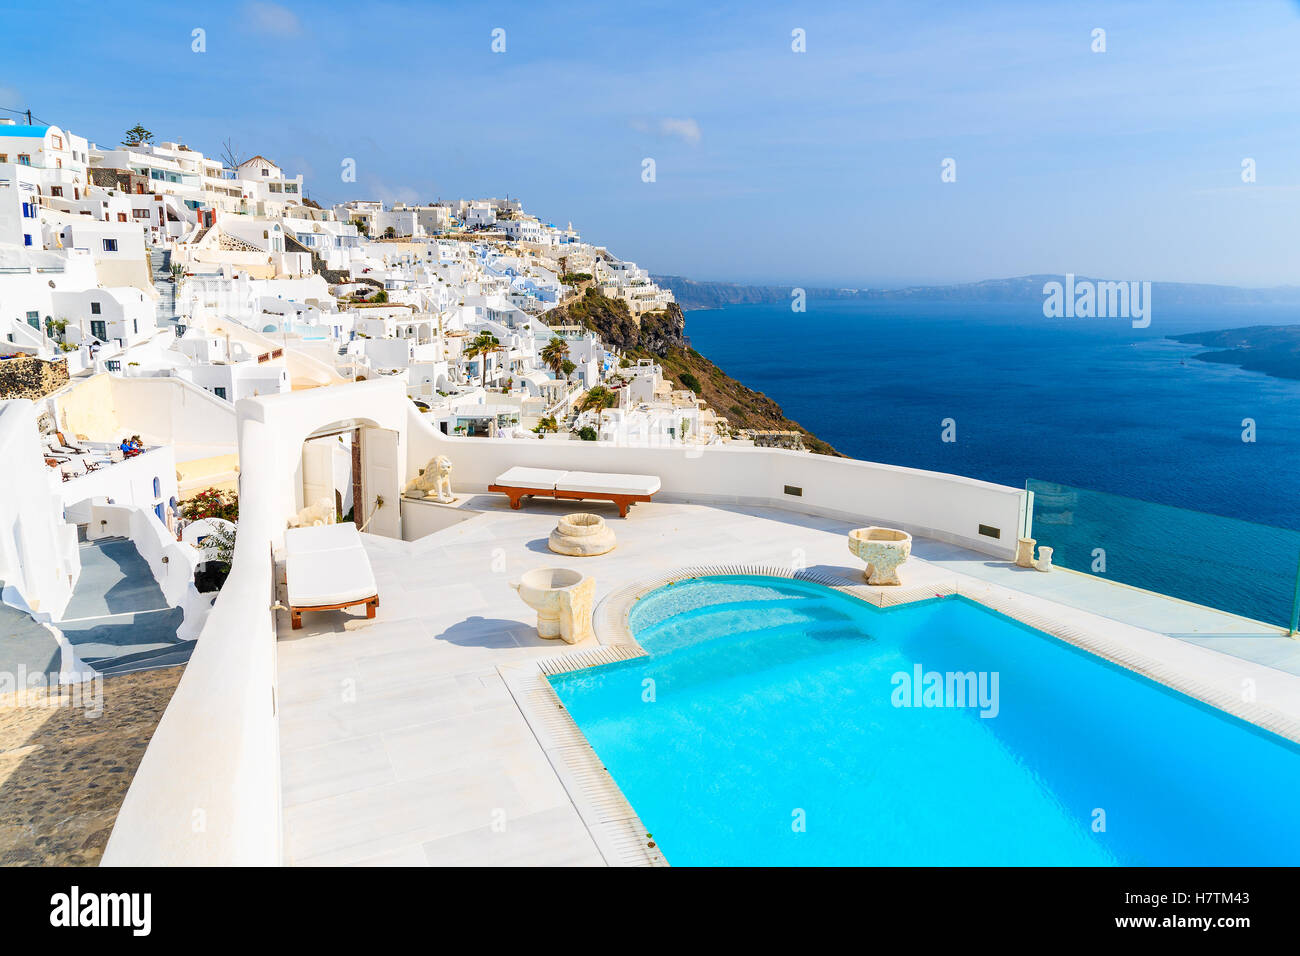 View of caldera and luxury swimming pool in foreground, typical white architecture of Imerovigli village on Santorini island, Greece. Stock Photo